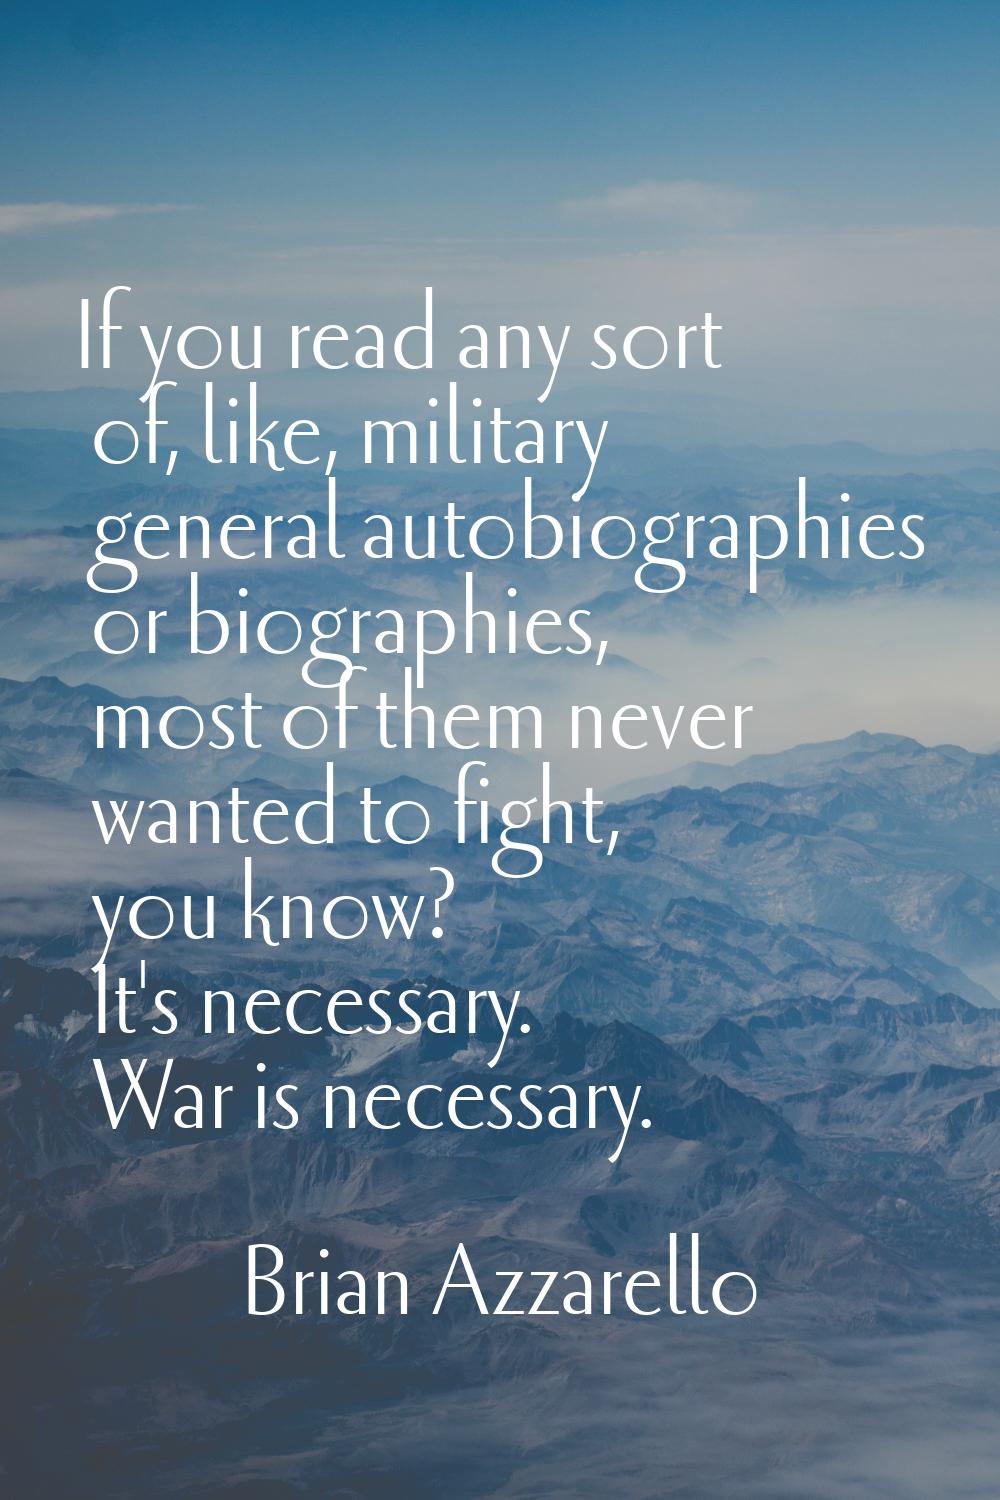 If you read any sort of, like, military general autobiographies or biographies, most of them never 